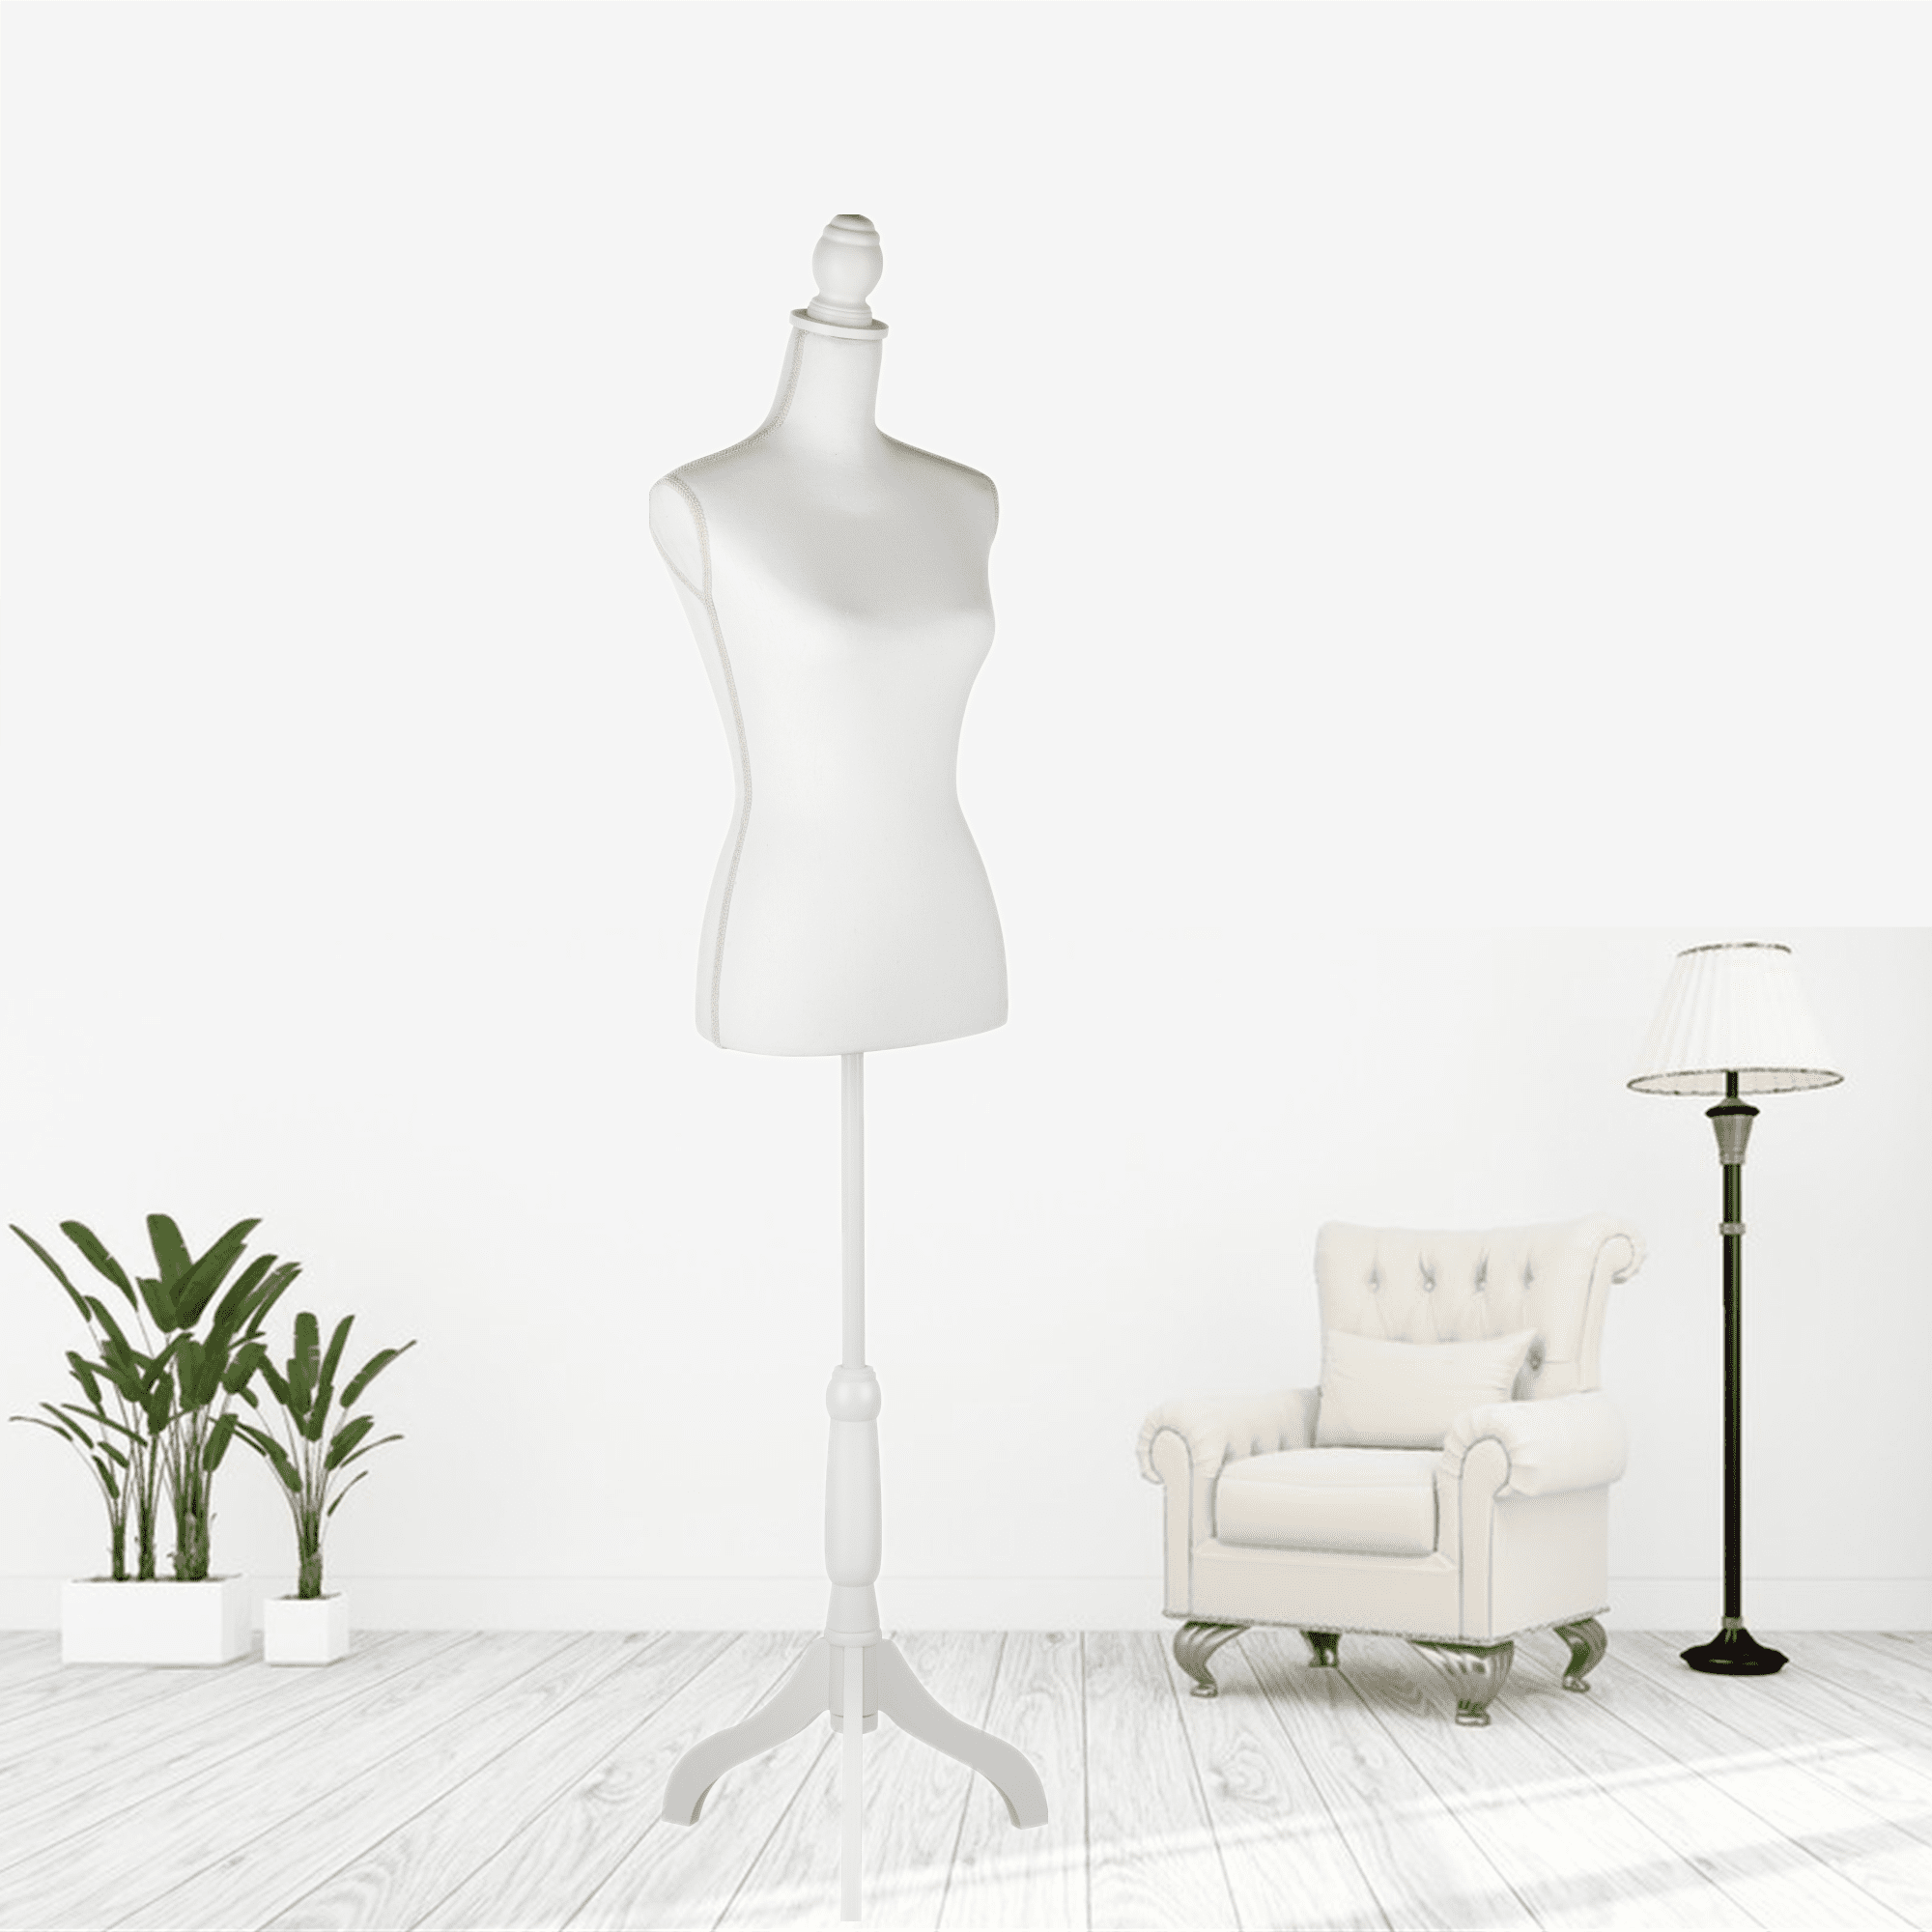 Hombour Female Mannequin Body, Sewing Mannequin Torso Dress Form,  Adjustable Mannequin With Stand For Sewing Dressmaker Jewelry